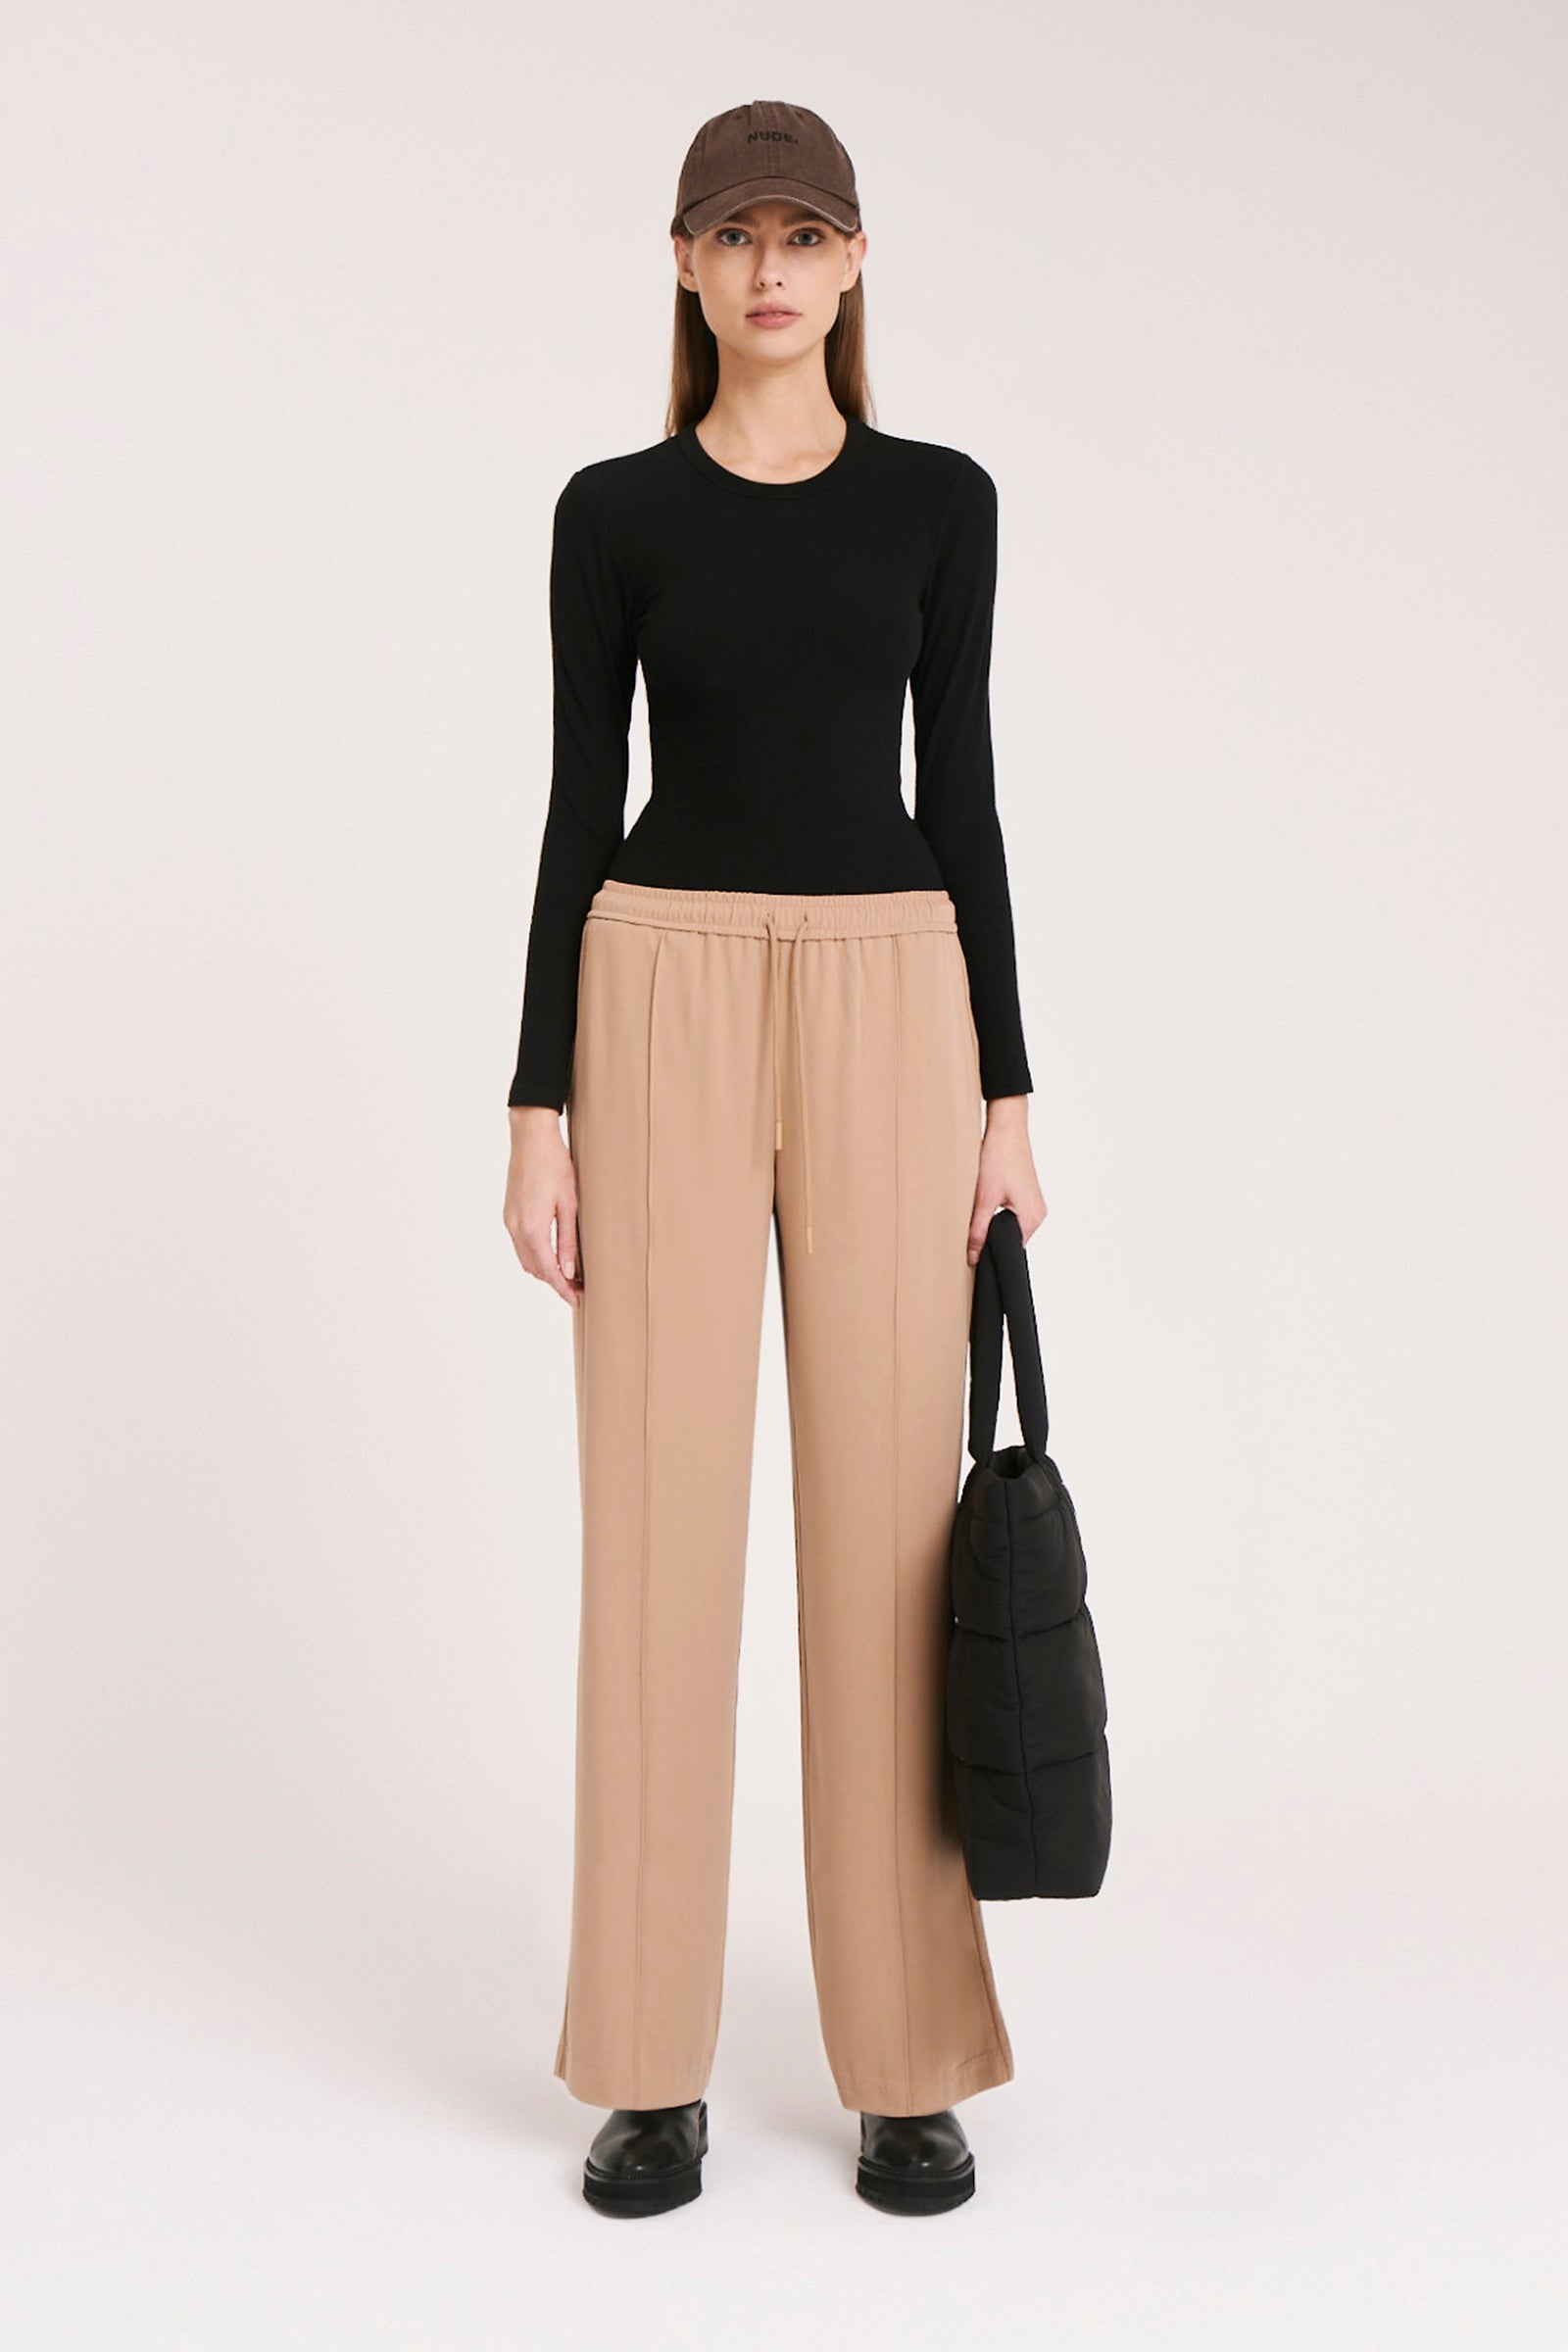 Nude Lucy Yanis Pant in Camel